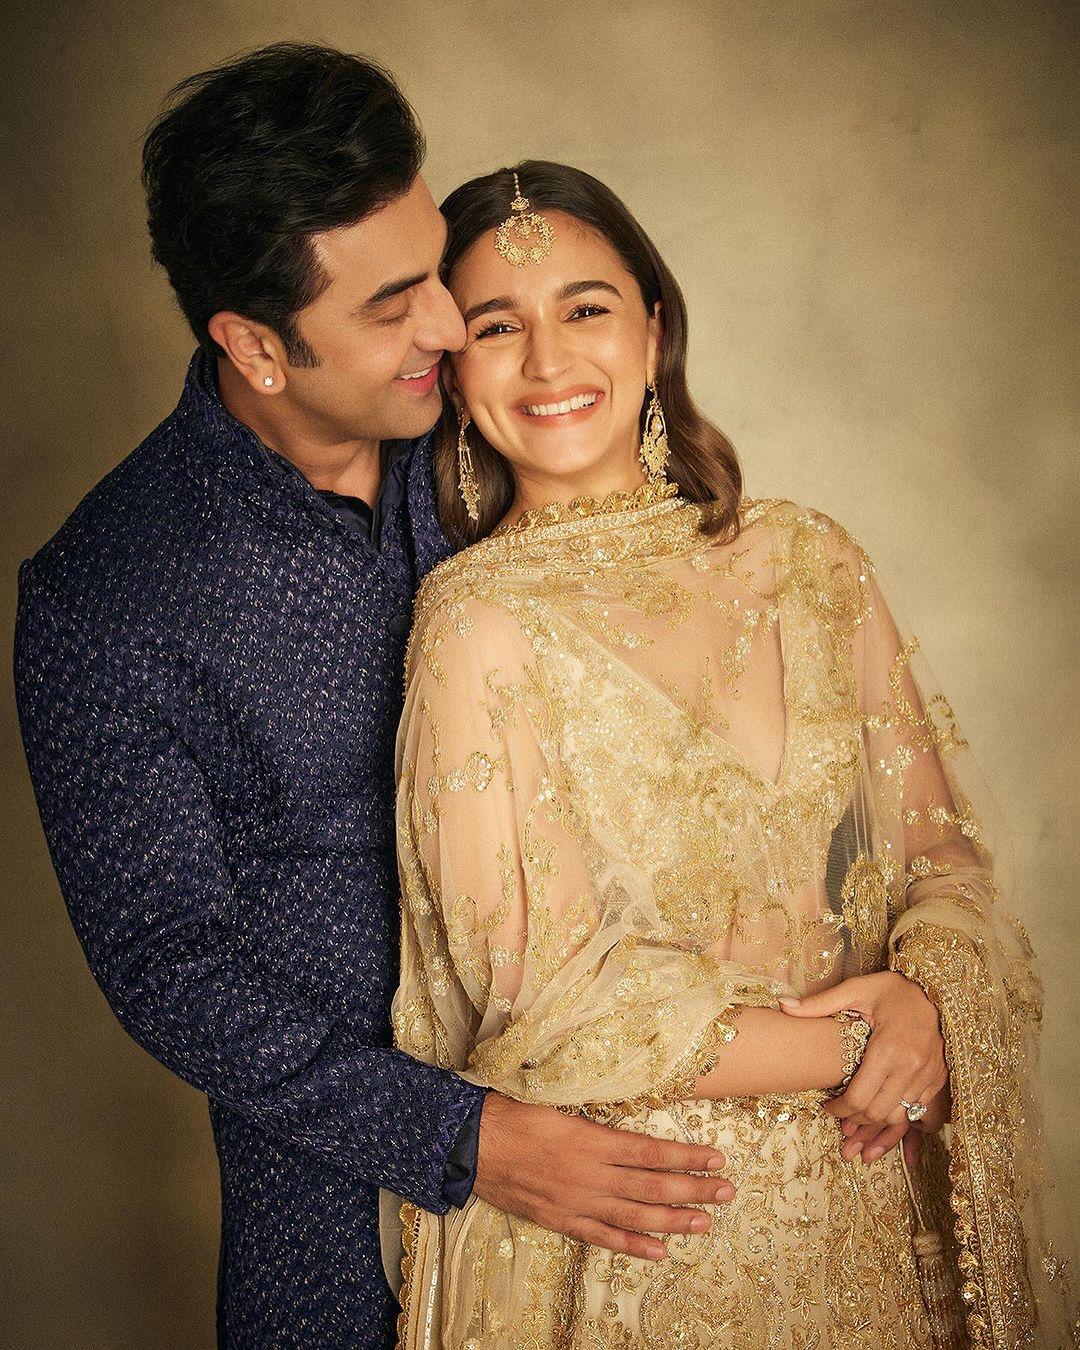 Alia Bhatt posted this loved-up picture alongside her husband Ranbir Kapoor. The couple look adorable!